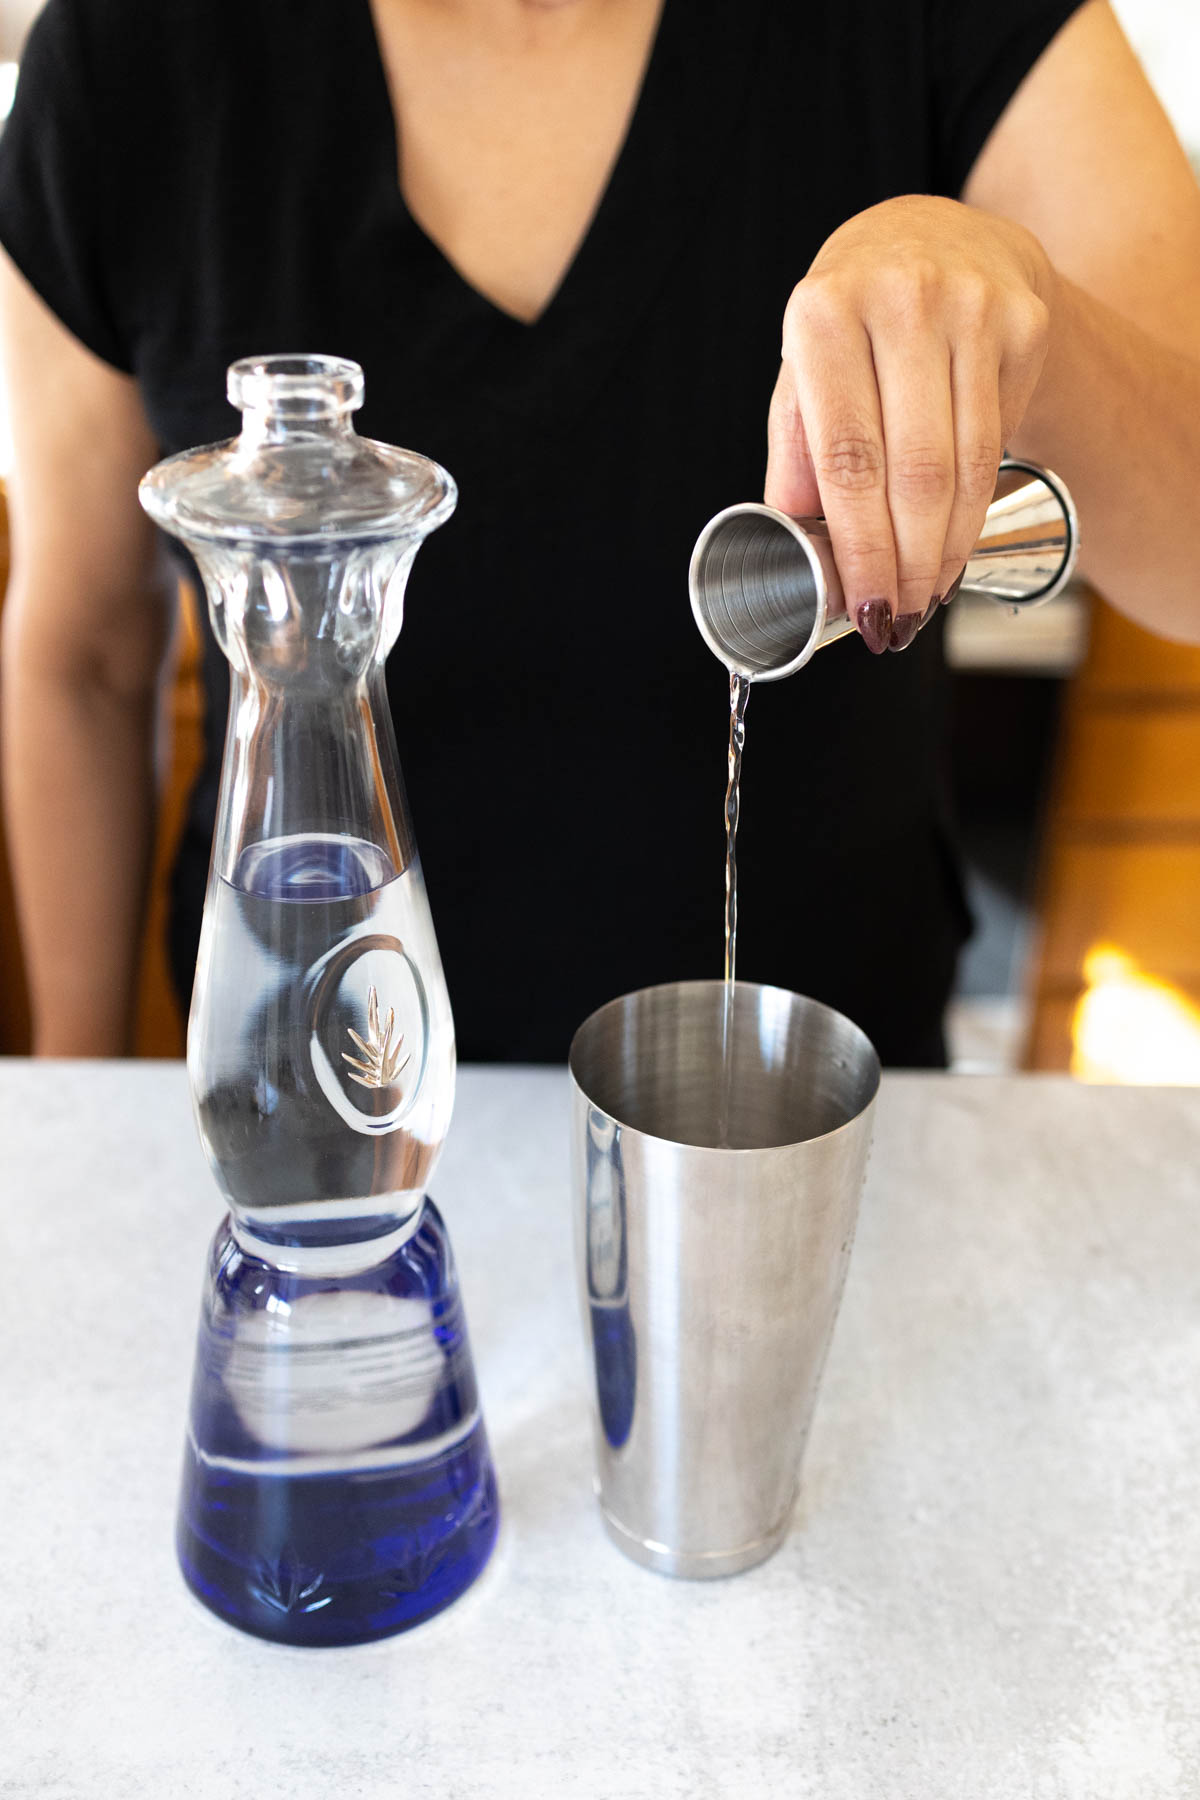 A woman pouring some Clase Azul Tequila Plate from the jigger into a shaker.